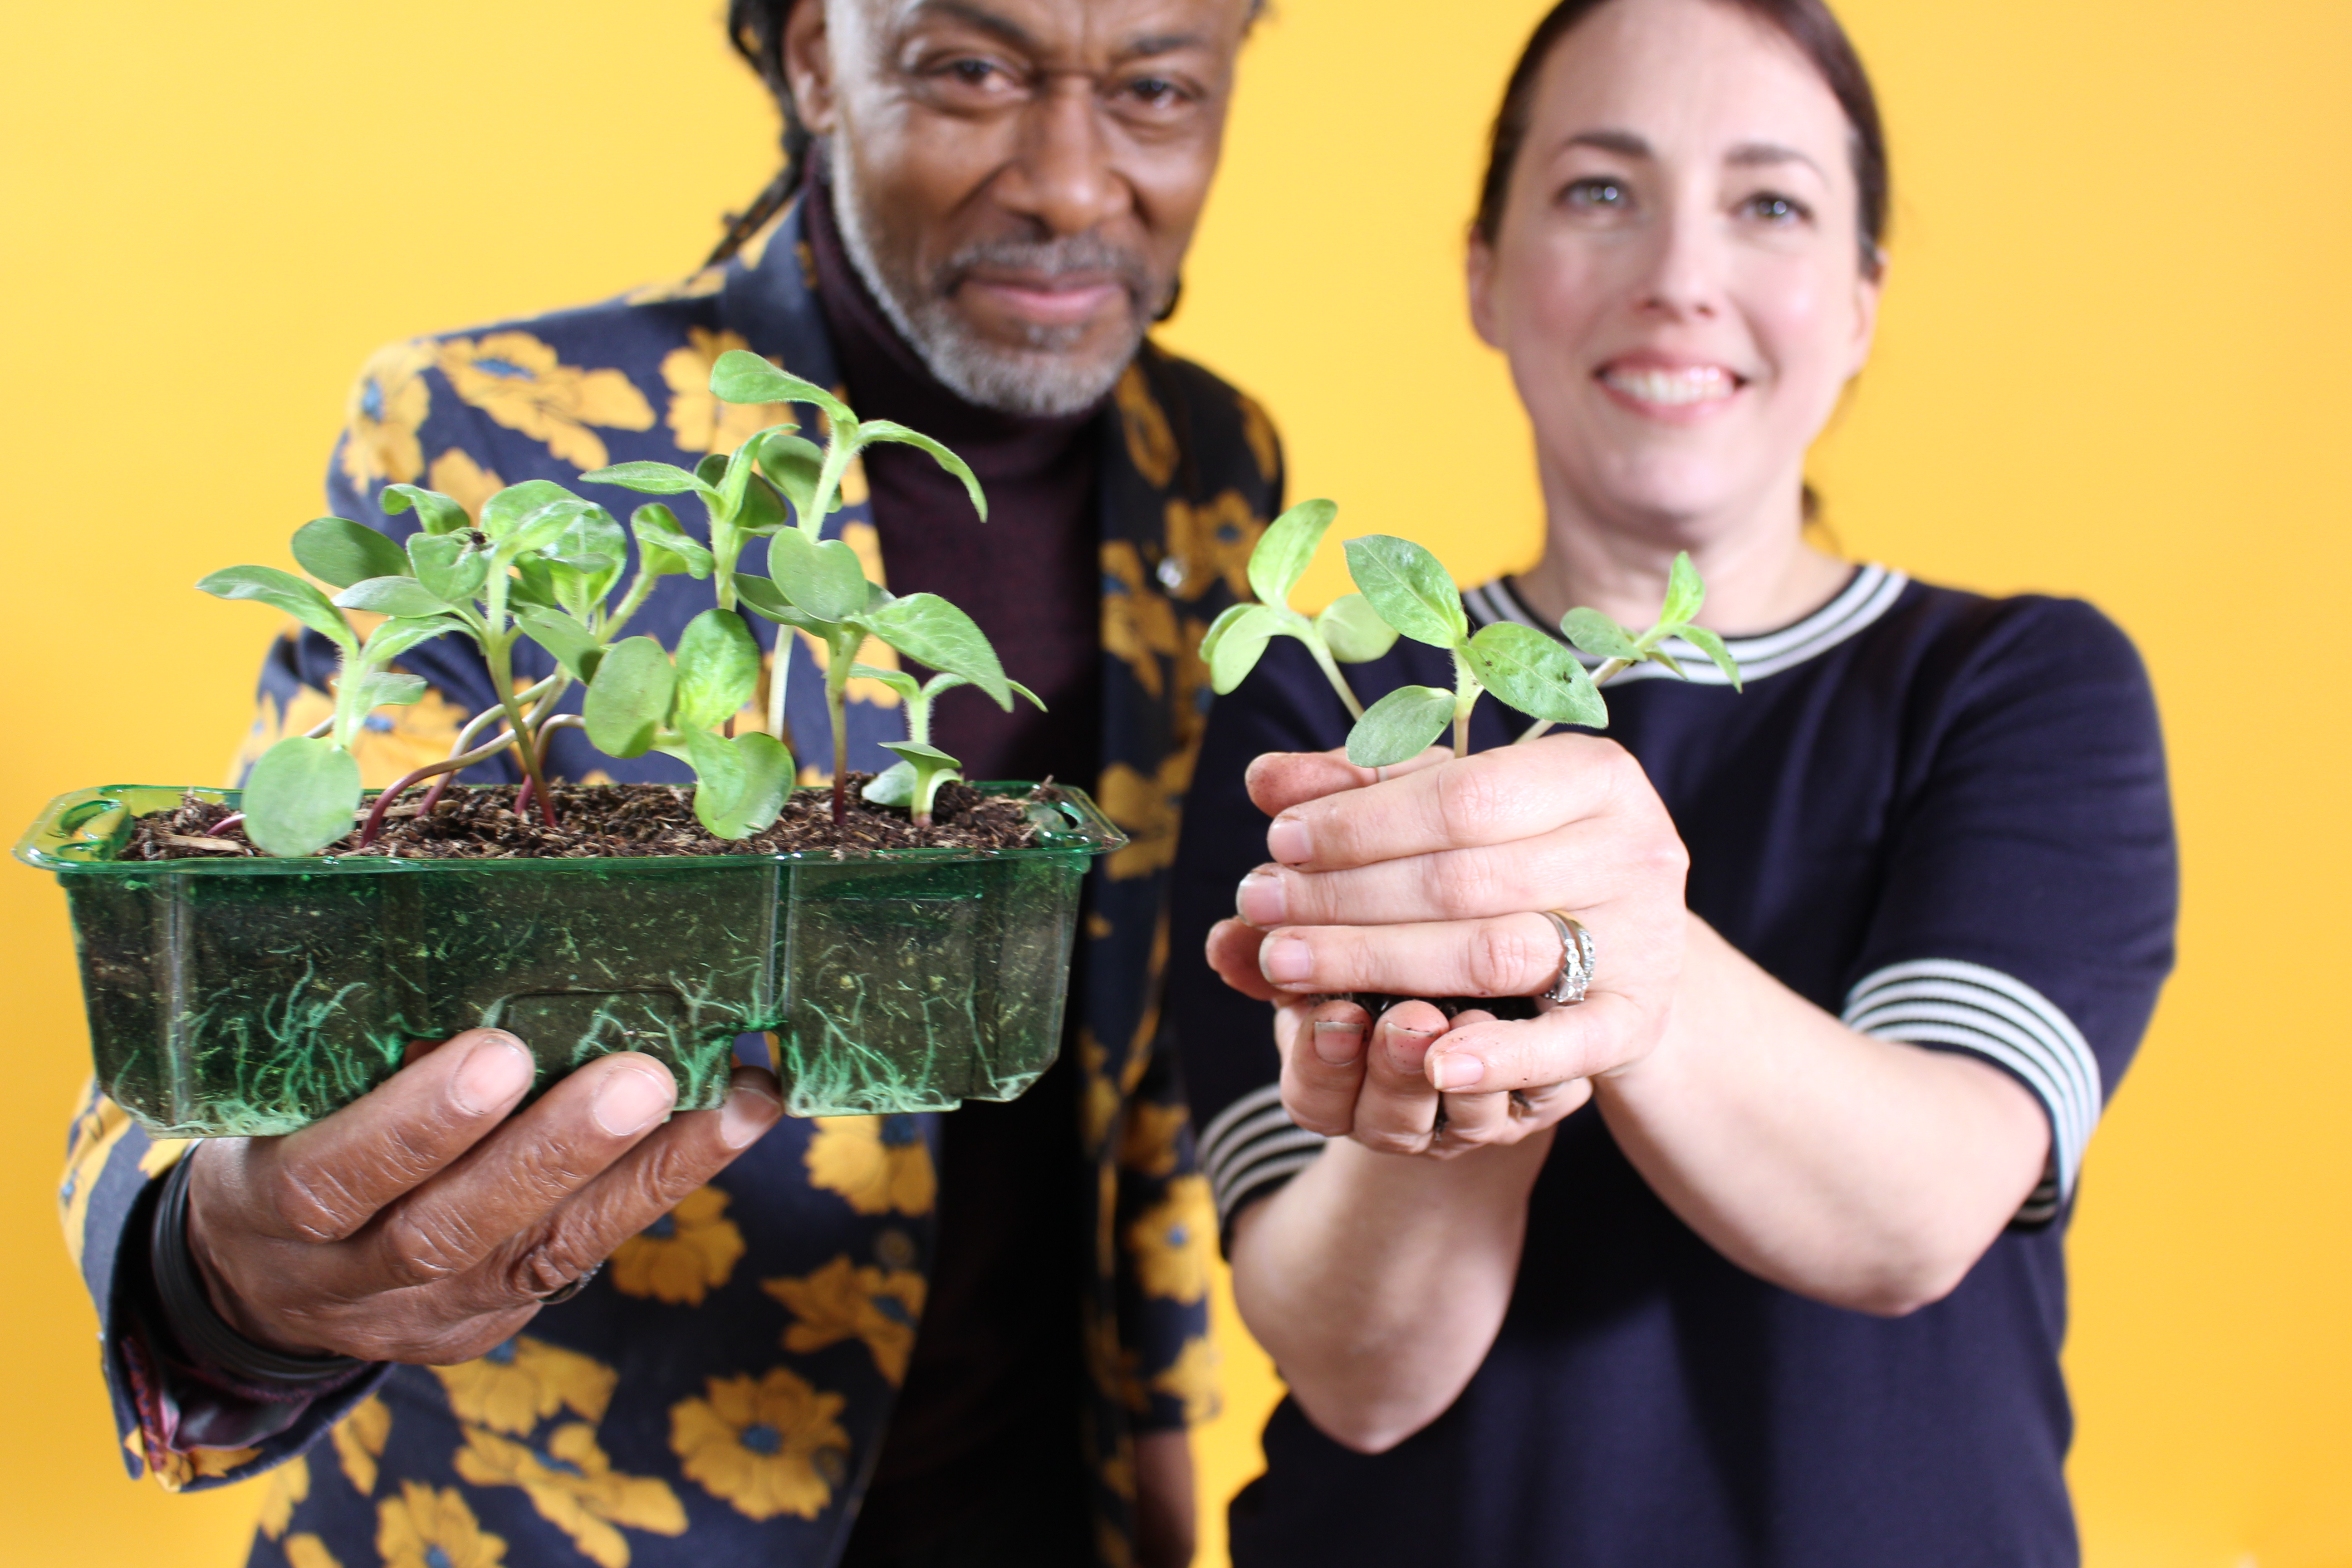 Danny Clarke and Fran Lawton smiling in front of a yellow backdrop holding seedlings to the camera. 